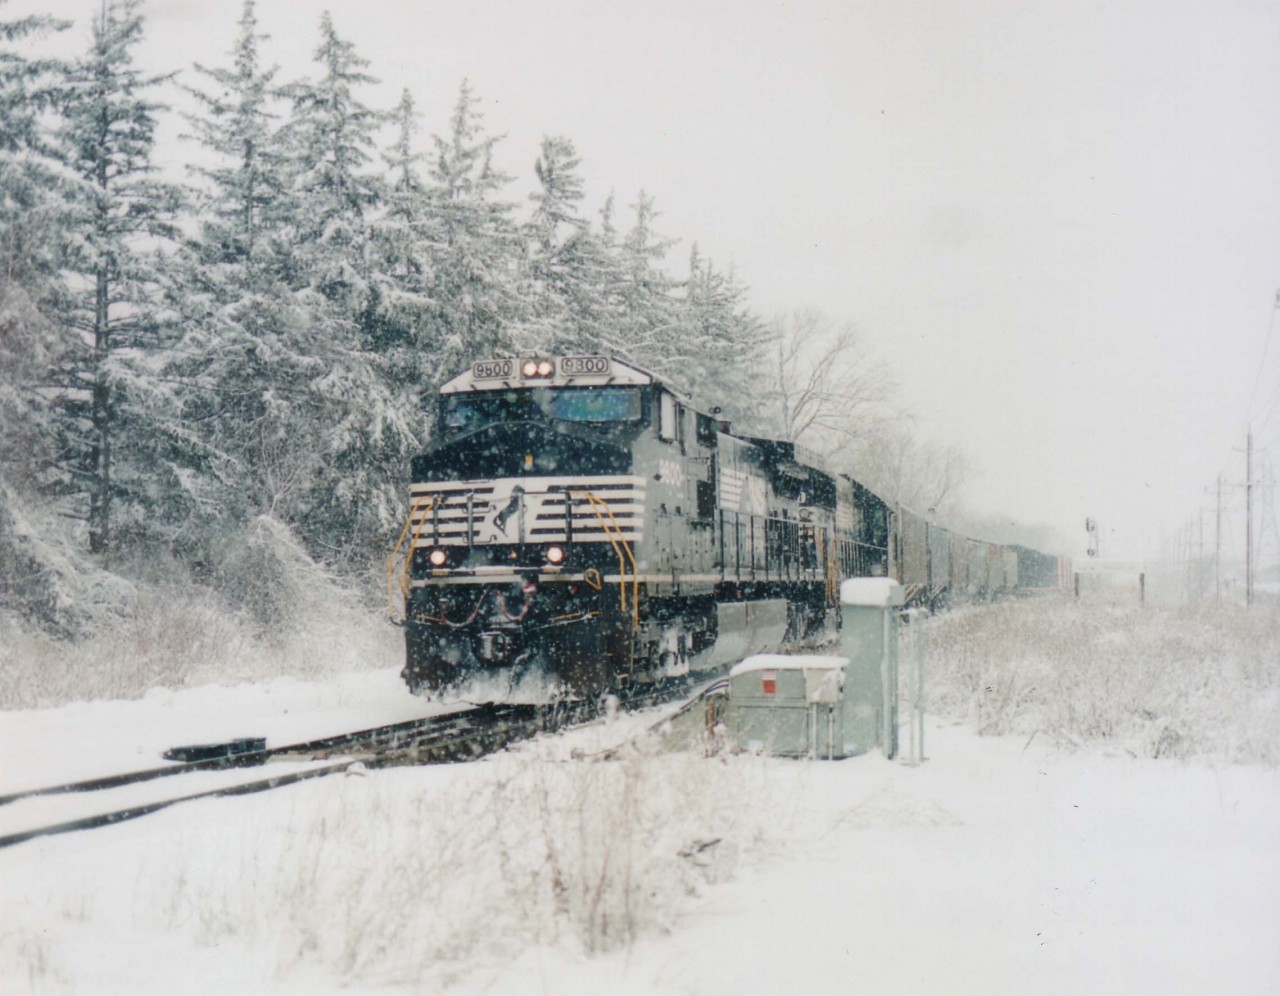 An image fitting for a "White Christmas" scene, this was actually taken on March 1, 2005 at Nelles Rd., in Grimsby. A nice wet snow created a pleasant setting for what would be a normally dull NS lashup of 9800 and 6611 heading Stateside with NS autoparts train #328 which used to run between Talbotville and Buffalo, and due to the chances of interesting power was a favourite with the fans.
The train is now discontinued, and the magnificient row of trees shown was flattened by a ferocious windstorm a couple of years ago.
The train is pictured coming onto the single track stretch between Grimsby and Jordan.